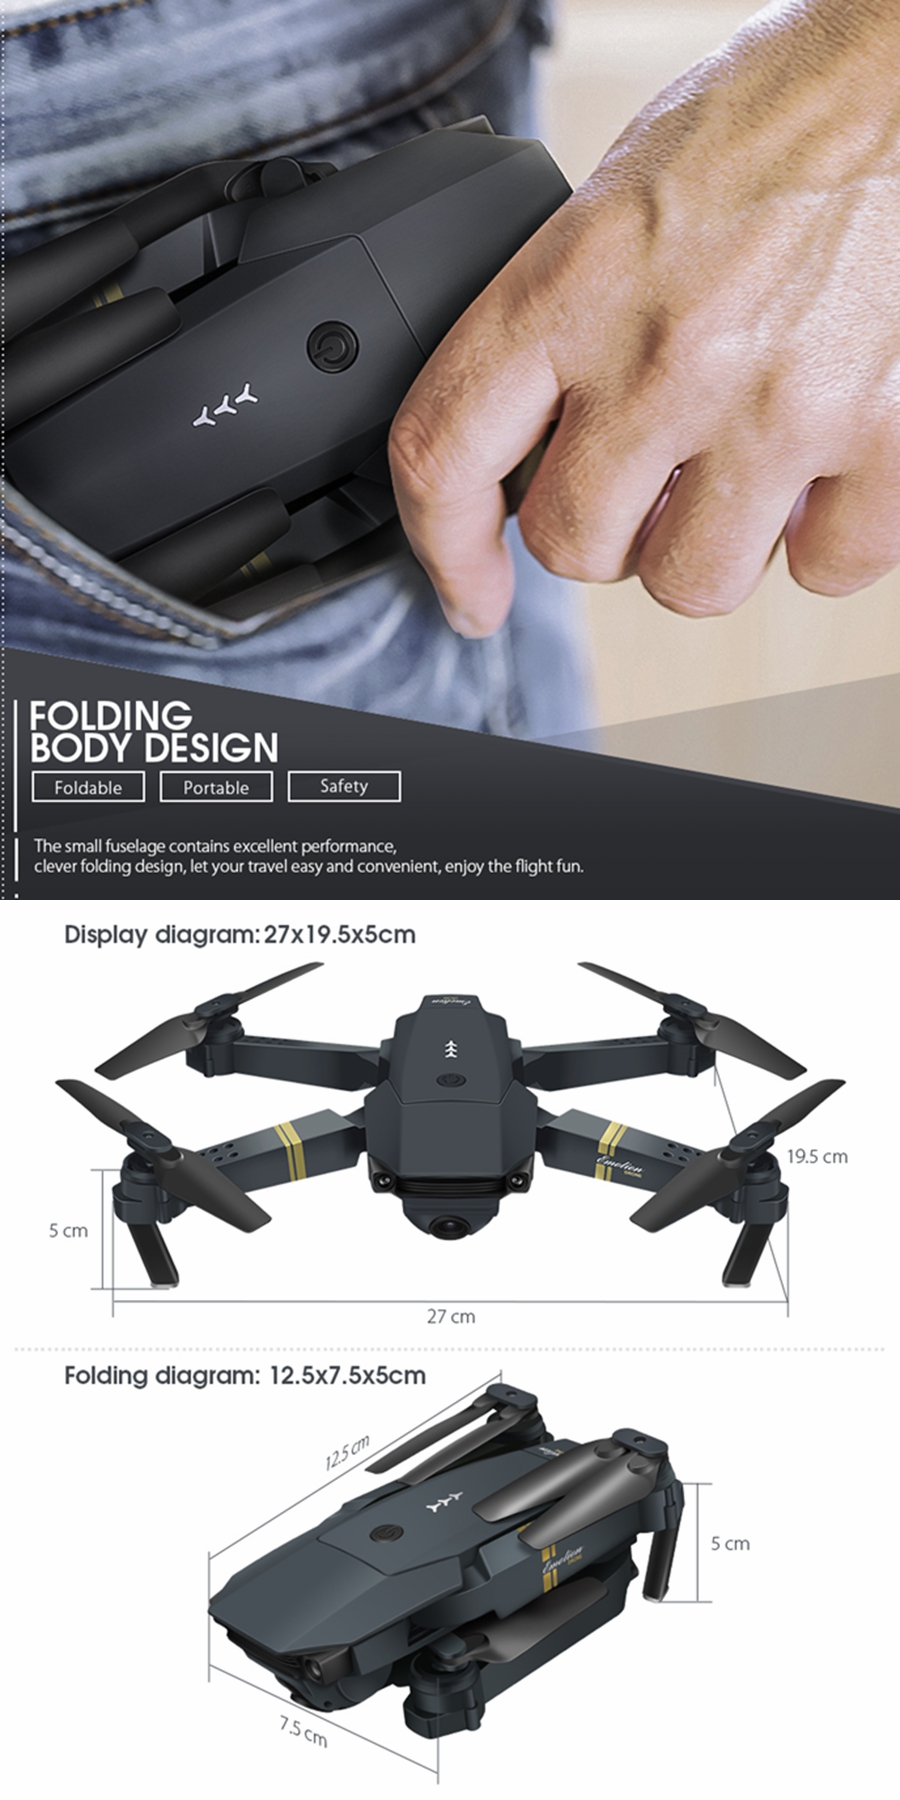 Eachine-E58-WIFI-FPV-With-720P1080P-HD-Wide-Angle-Camera-High-Hold-Mode-Foldable-RC-Drone-Quadcopter-1212232-2